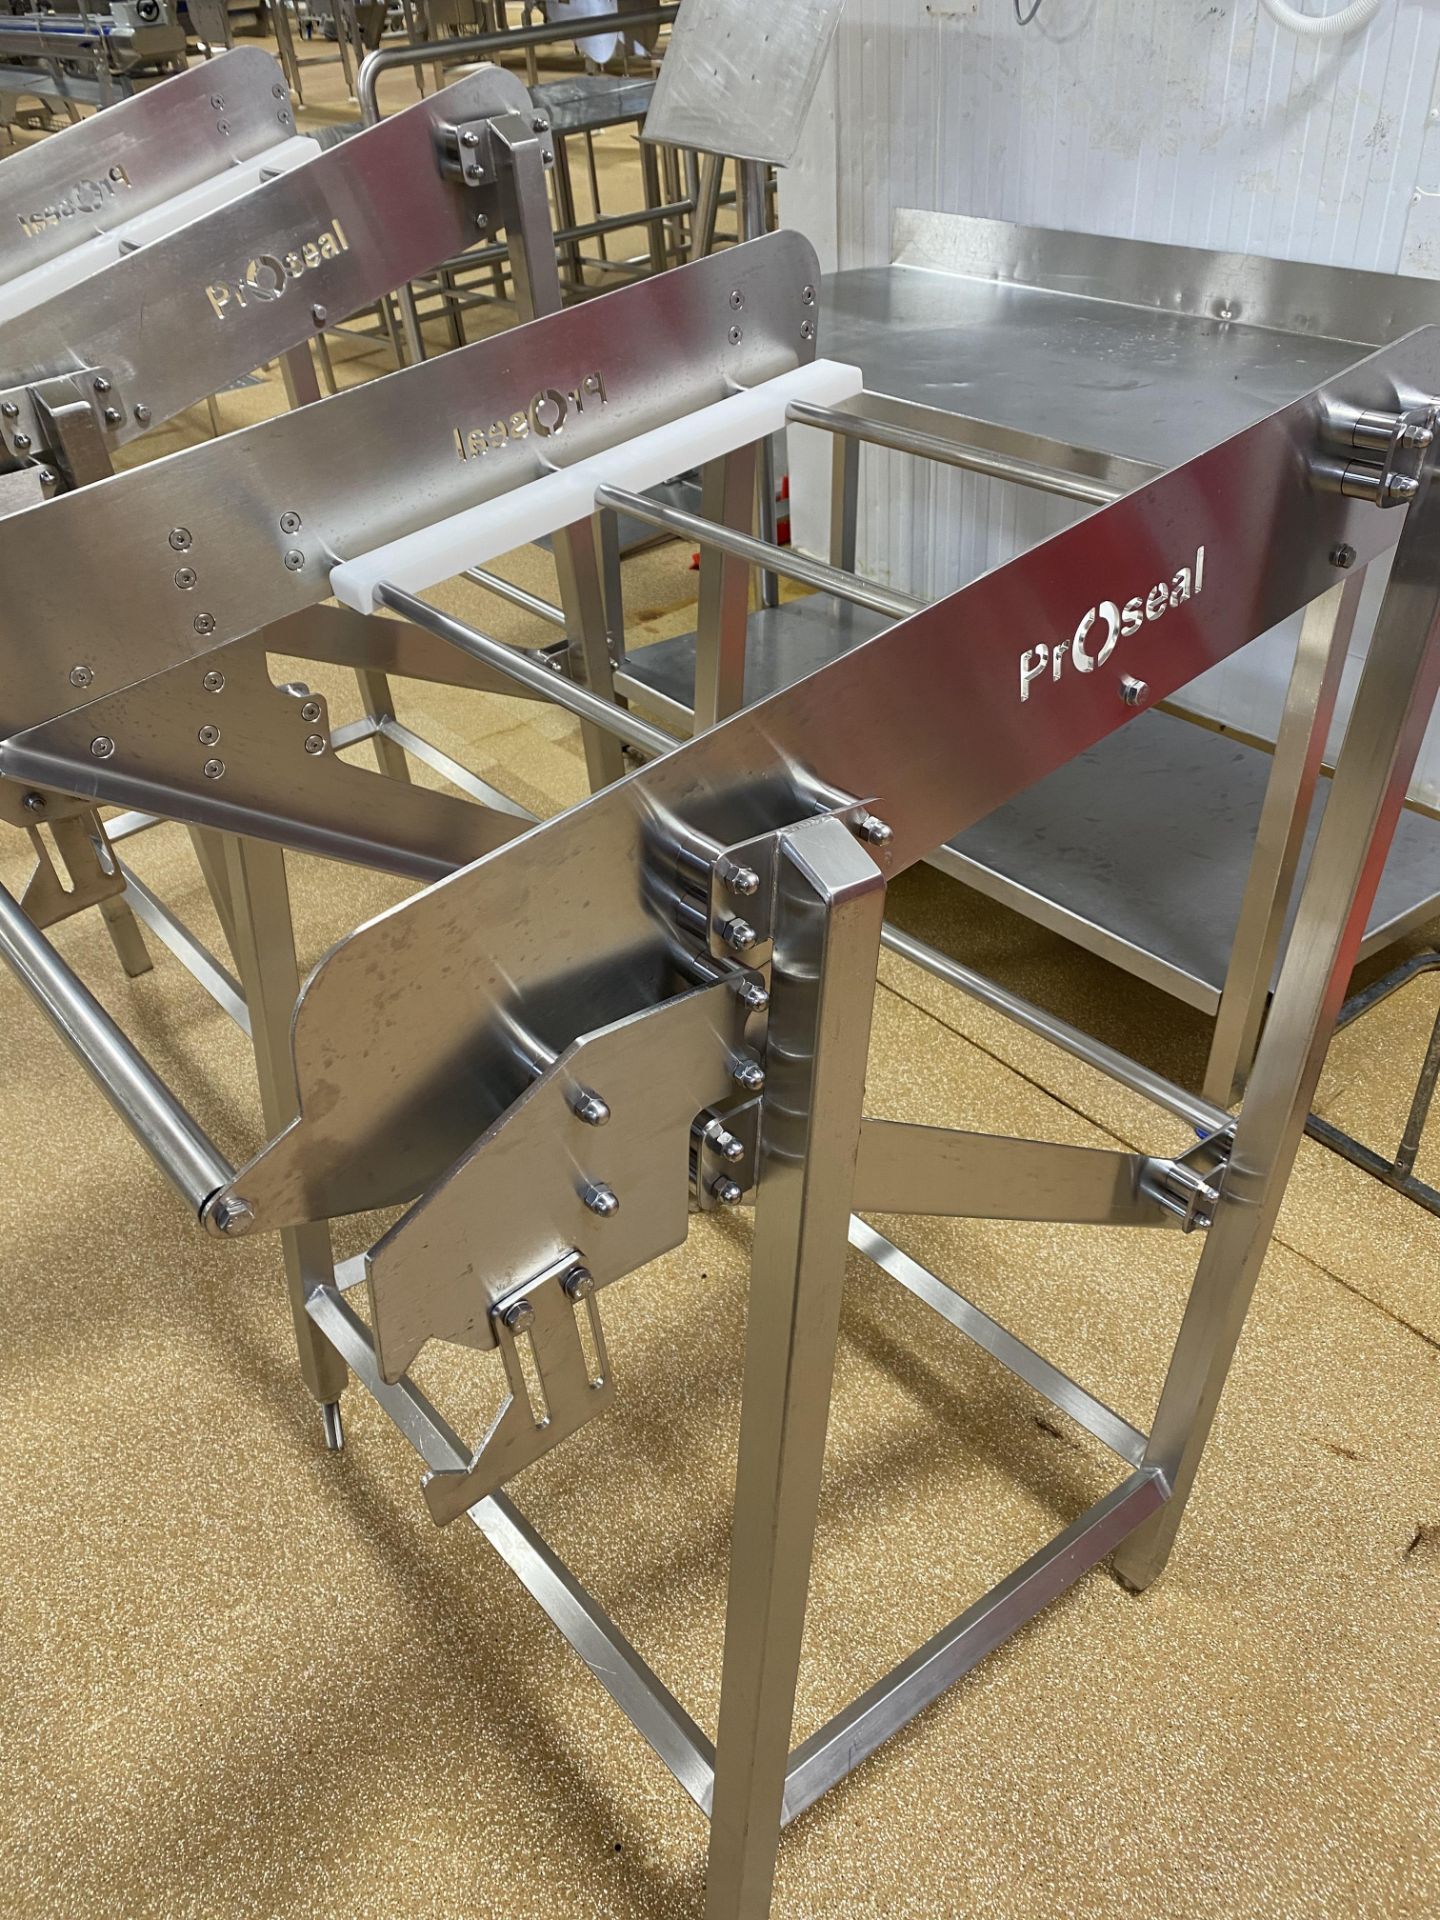 Proseal stainless steel tray picking unit - Image 2 of 2